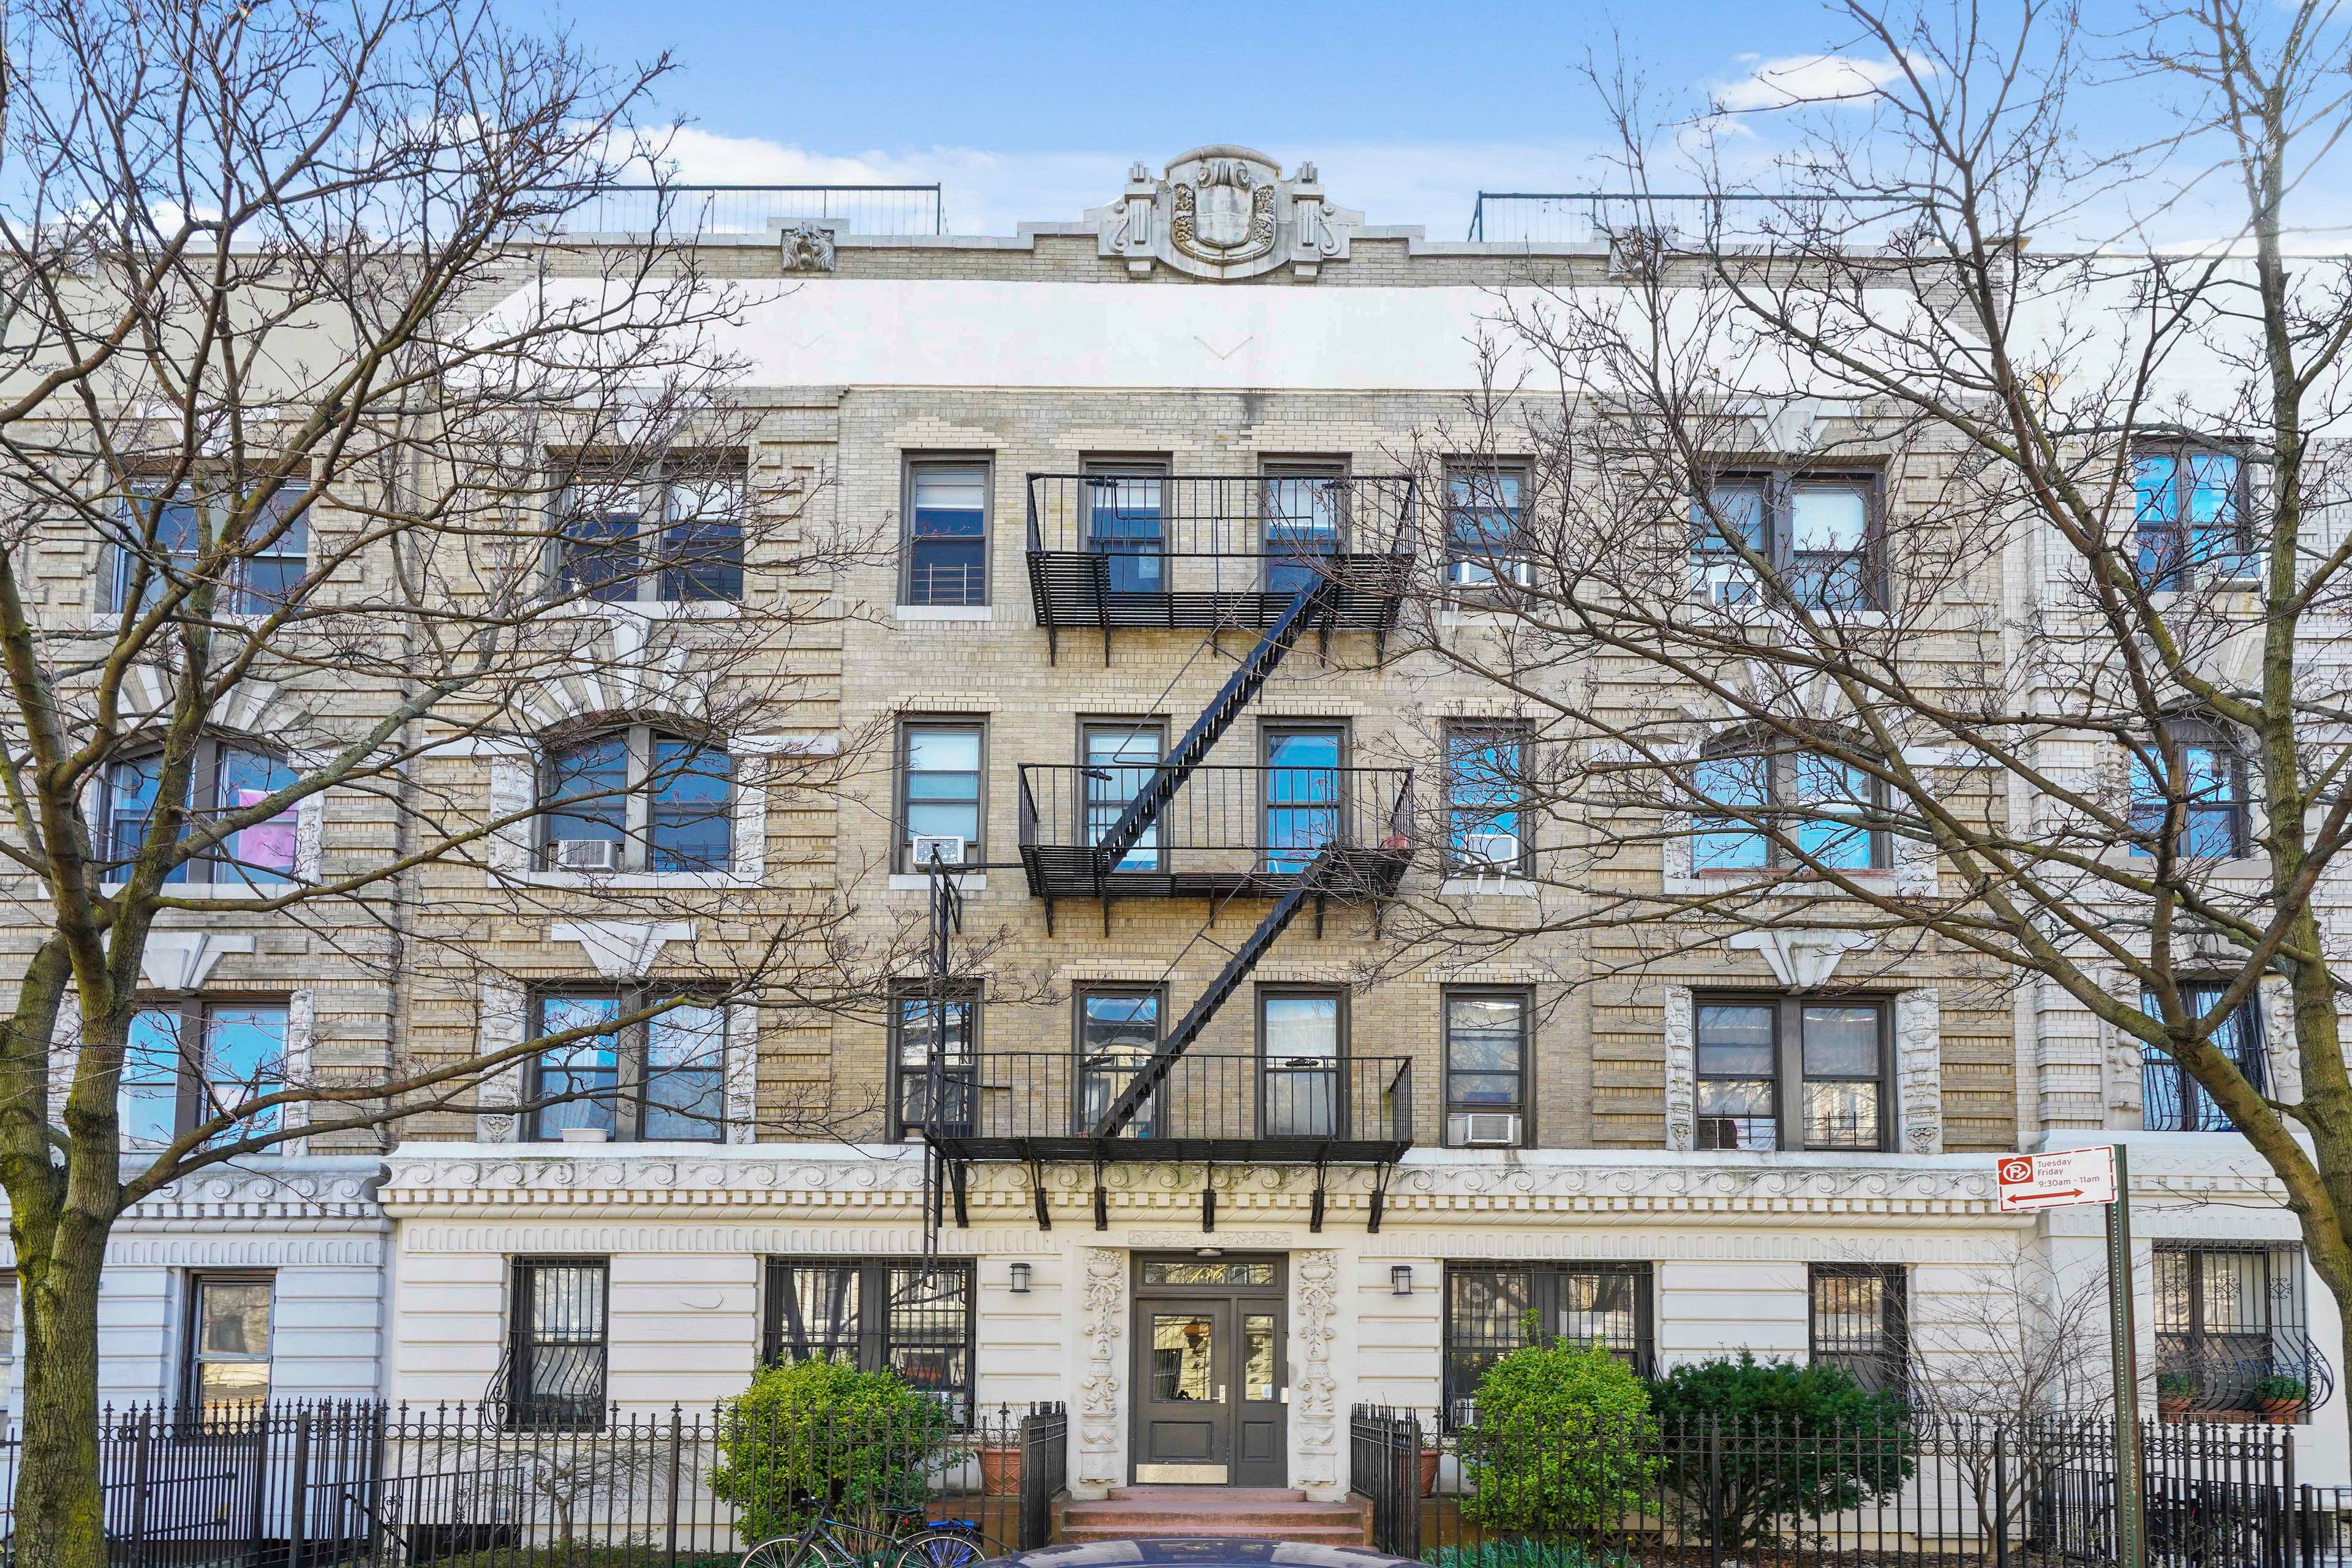 Come home to a beautiful, leafy, Sterling Place in the heart of Prospect Heights.